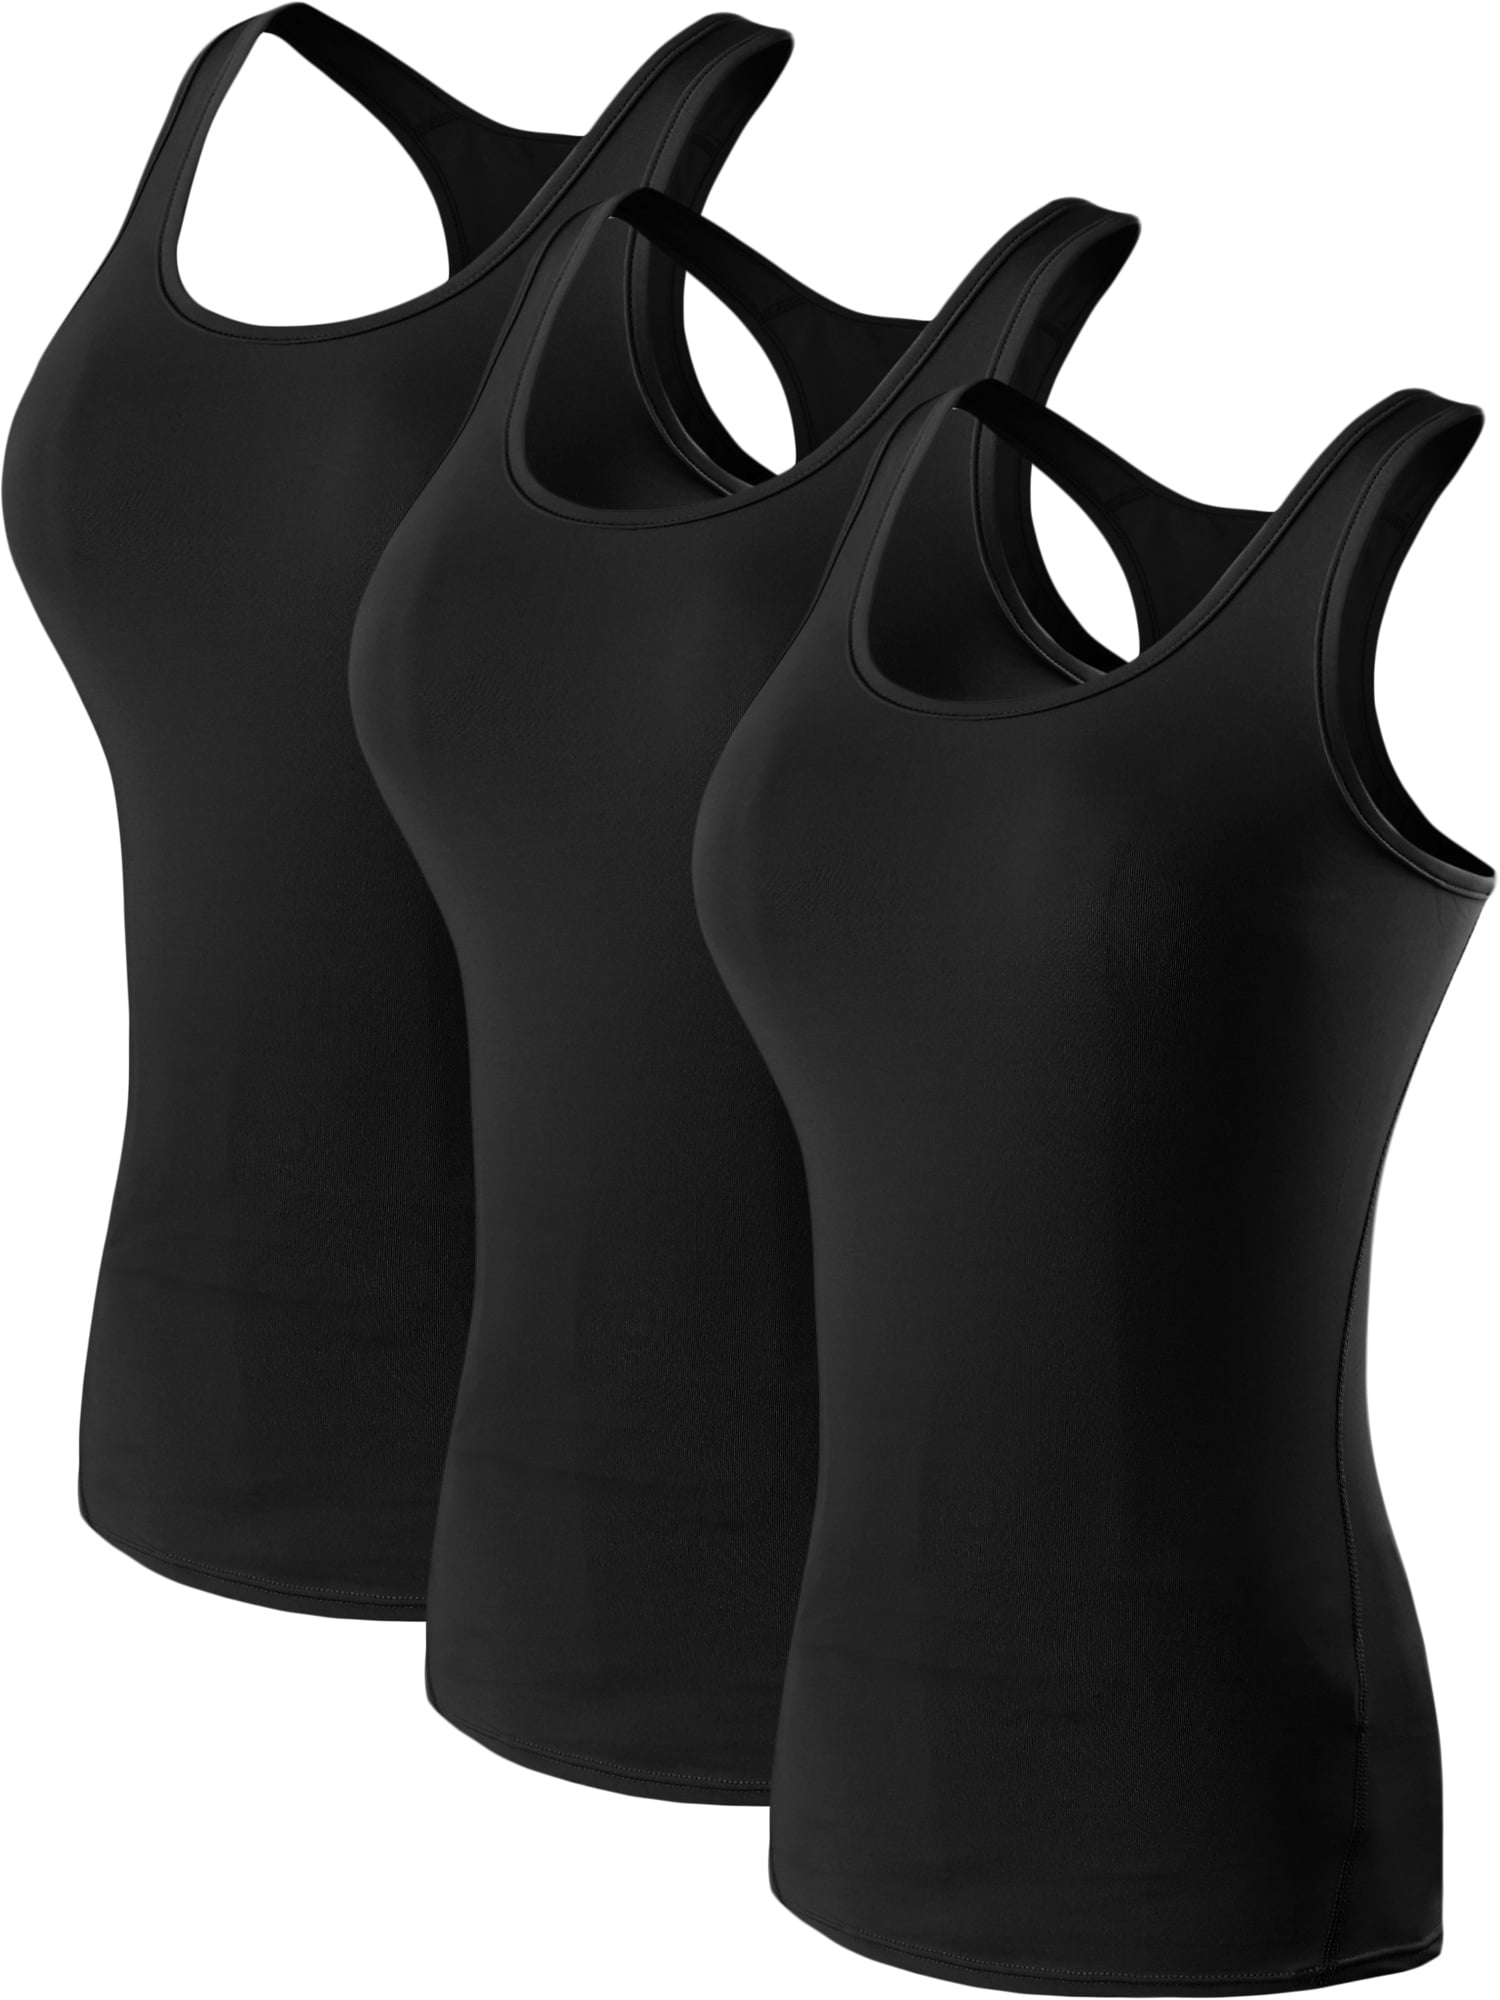 NELEUS Womens Compression Base Layer Size Dry XS Pack,Black+Gray+White,US Top 3 Fit Tank